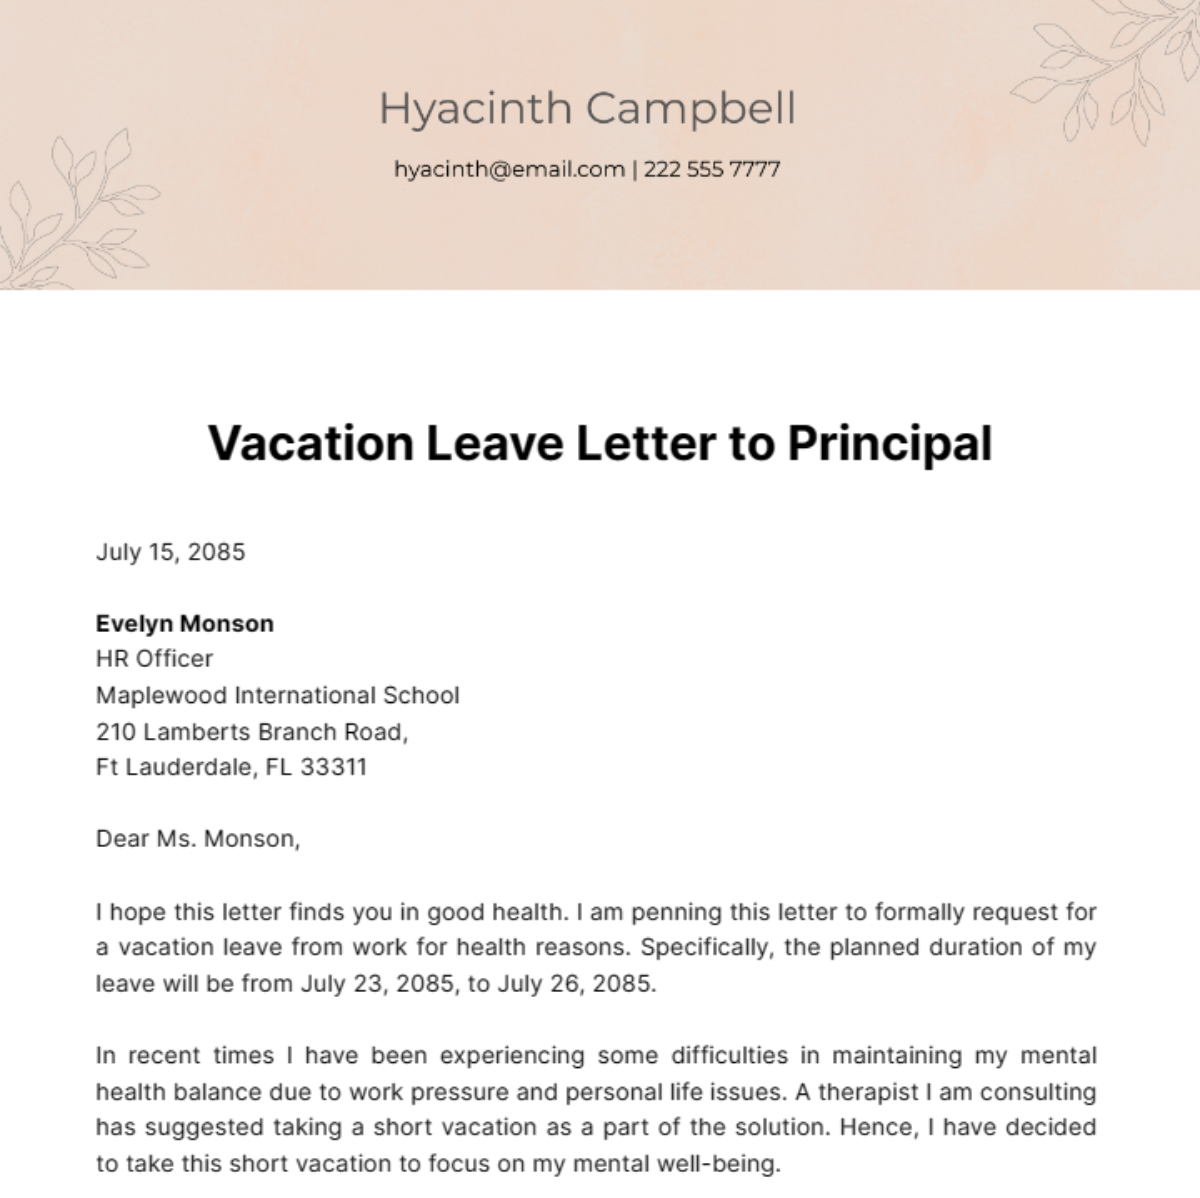 Vacation Leave Letter to Principal Template